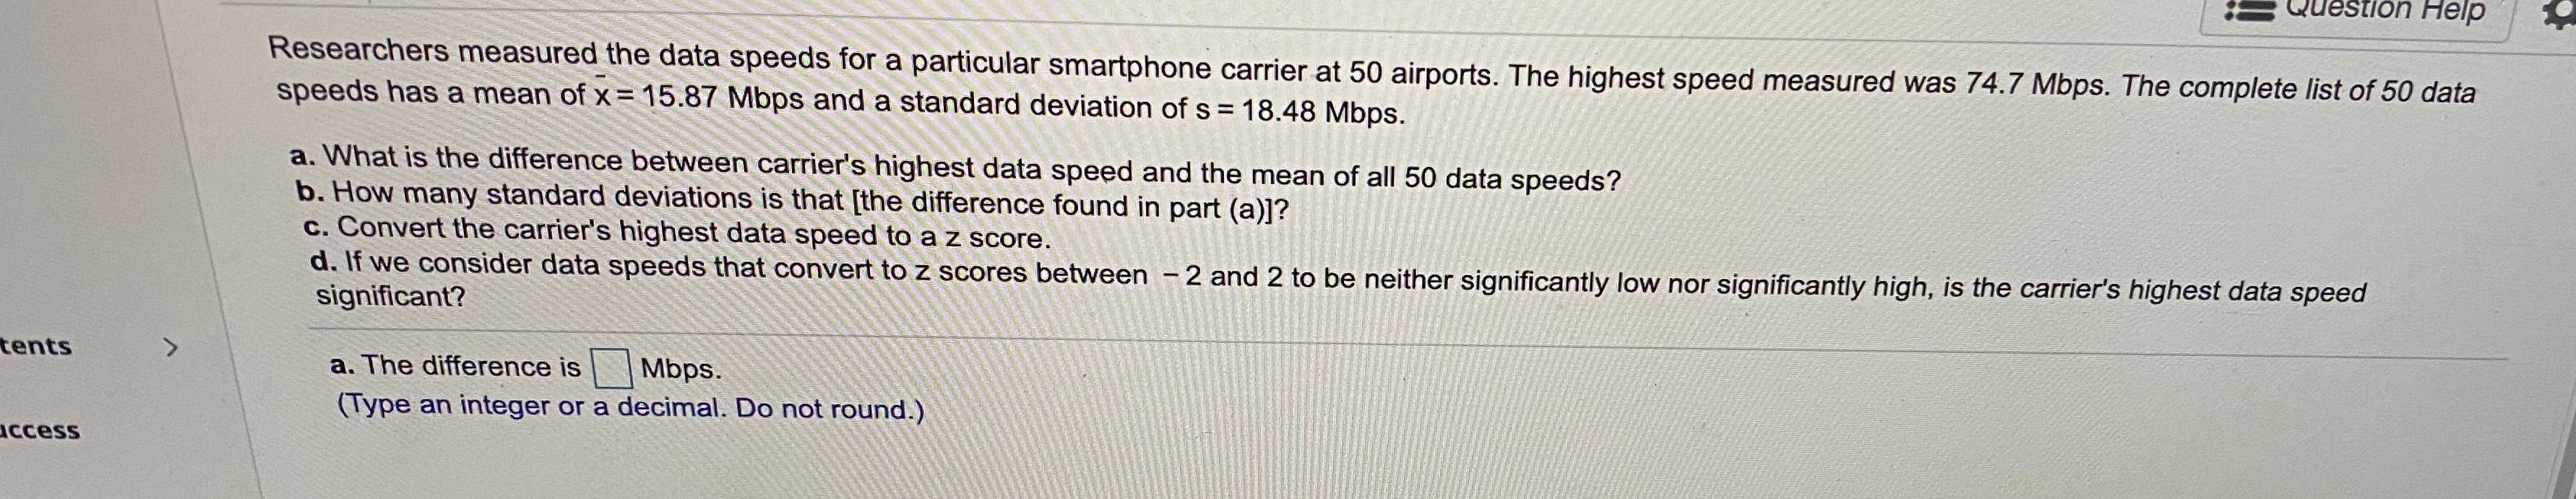 S Question Help
Researchers measured the data speeds for a particular smartphone carrier at 50 airports. The highest speed measured was 74.7 Mbps. The complete list of 50 data
speeds has a mean of x = 15.87 Mbps and a standard deviation of s = 18.48 Mbps.
a. What is the difference between carrier's highest data speed and the mean of all 50 data speeds?
b. How many standard deviations is that [the difference found in part (a)]?
c. Convert the carrier's highest data speed to a z score.
d. If we consider data speeds that convert to z scores between - 2 and 2 to be neither significantly low nor significantly high, is the carrier's highest data speed
significant?
tents
a. The difference is
Mbps.
(Type an integer or a decimal. Do not round.)
Access
